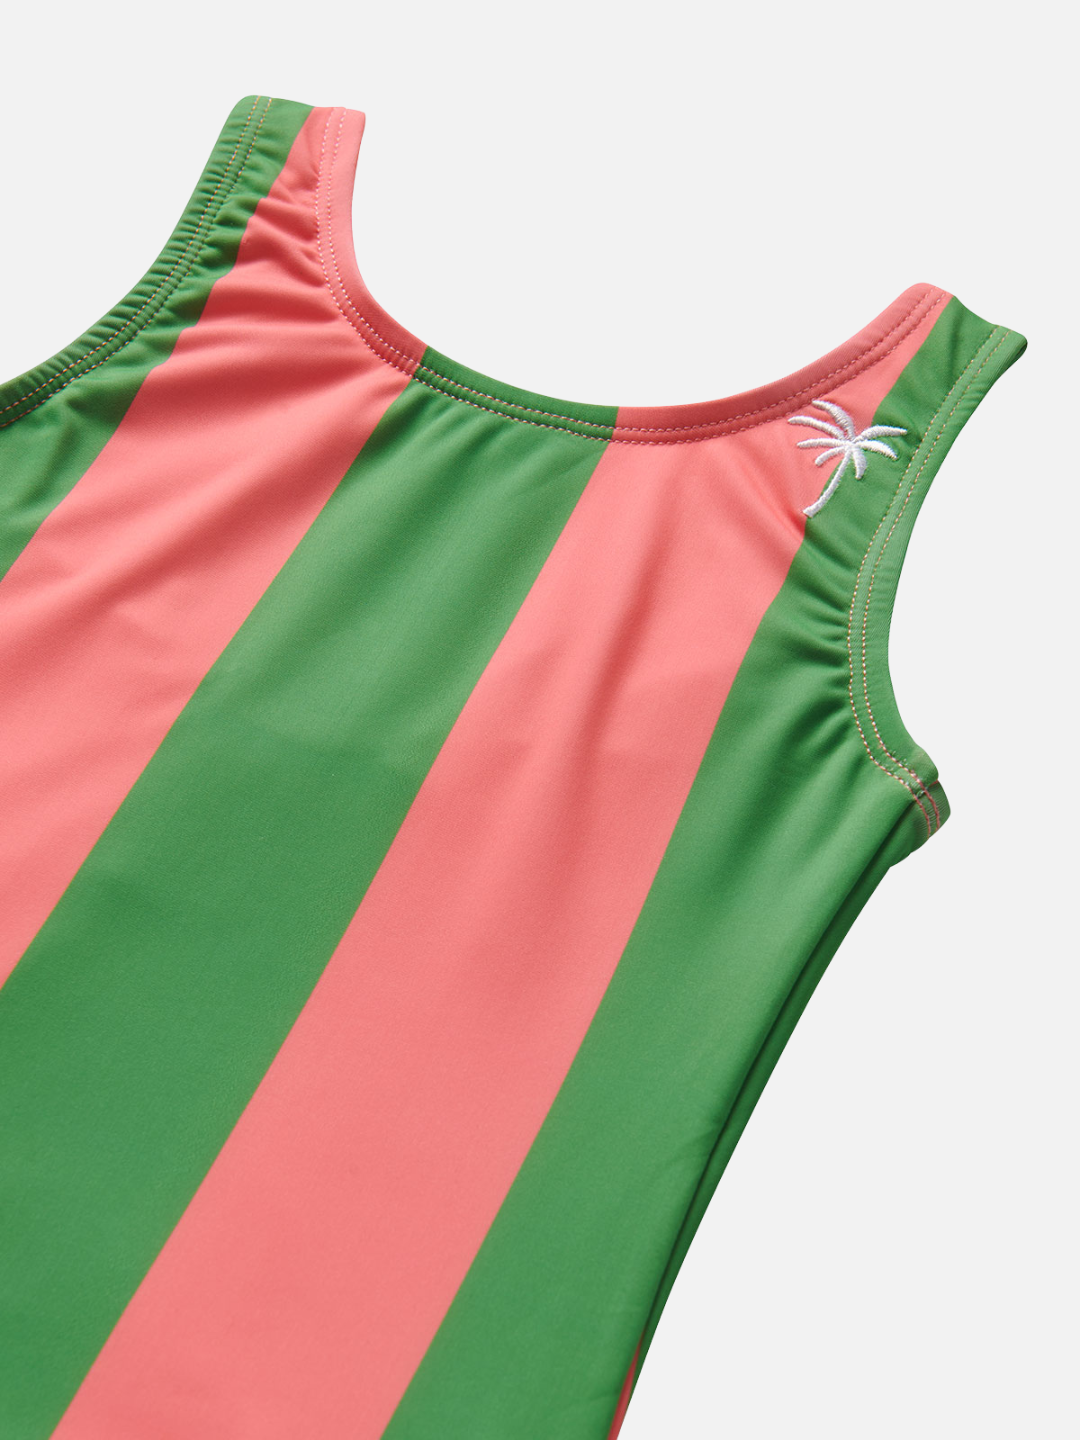 A close up of the Retro Stripe Swimsuit in Watermelon